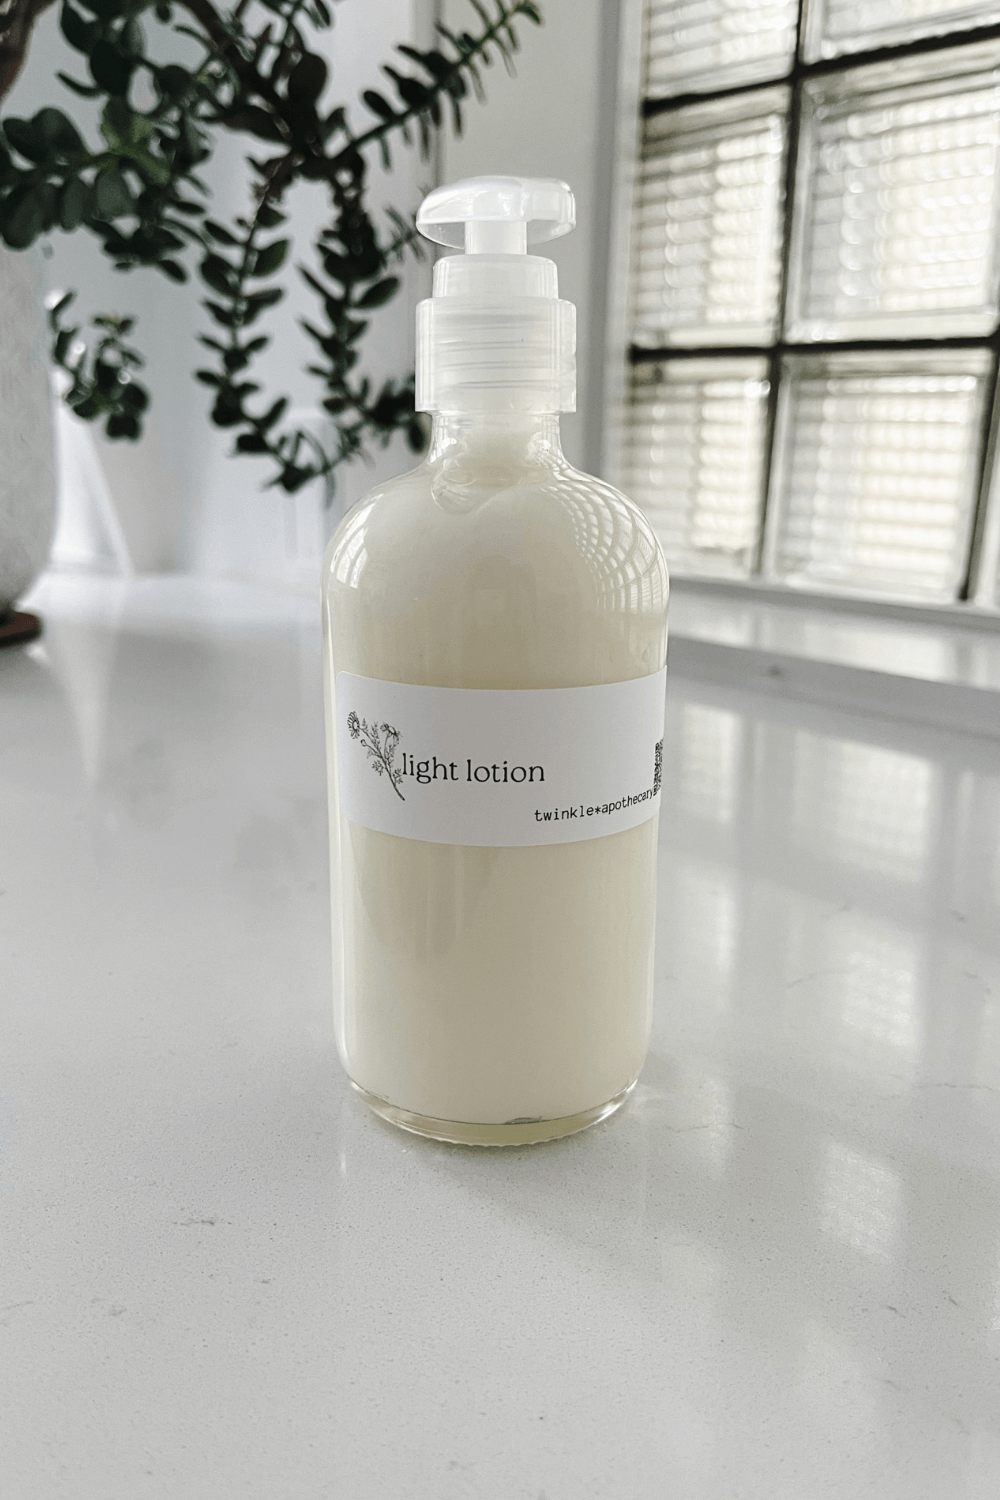 8 oz glass bottle of twinkle apothecary light lotion 